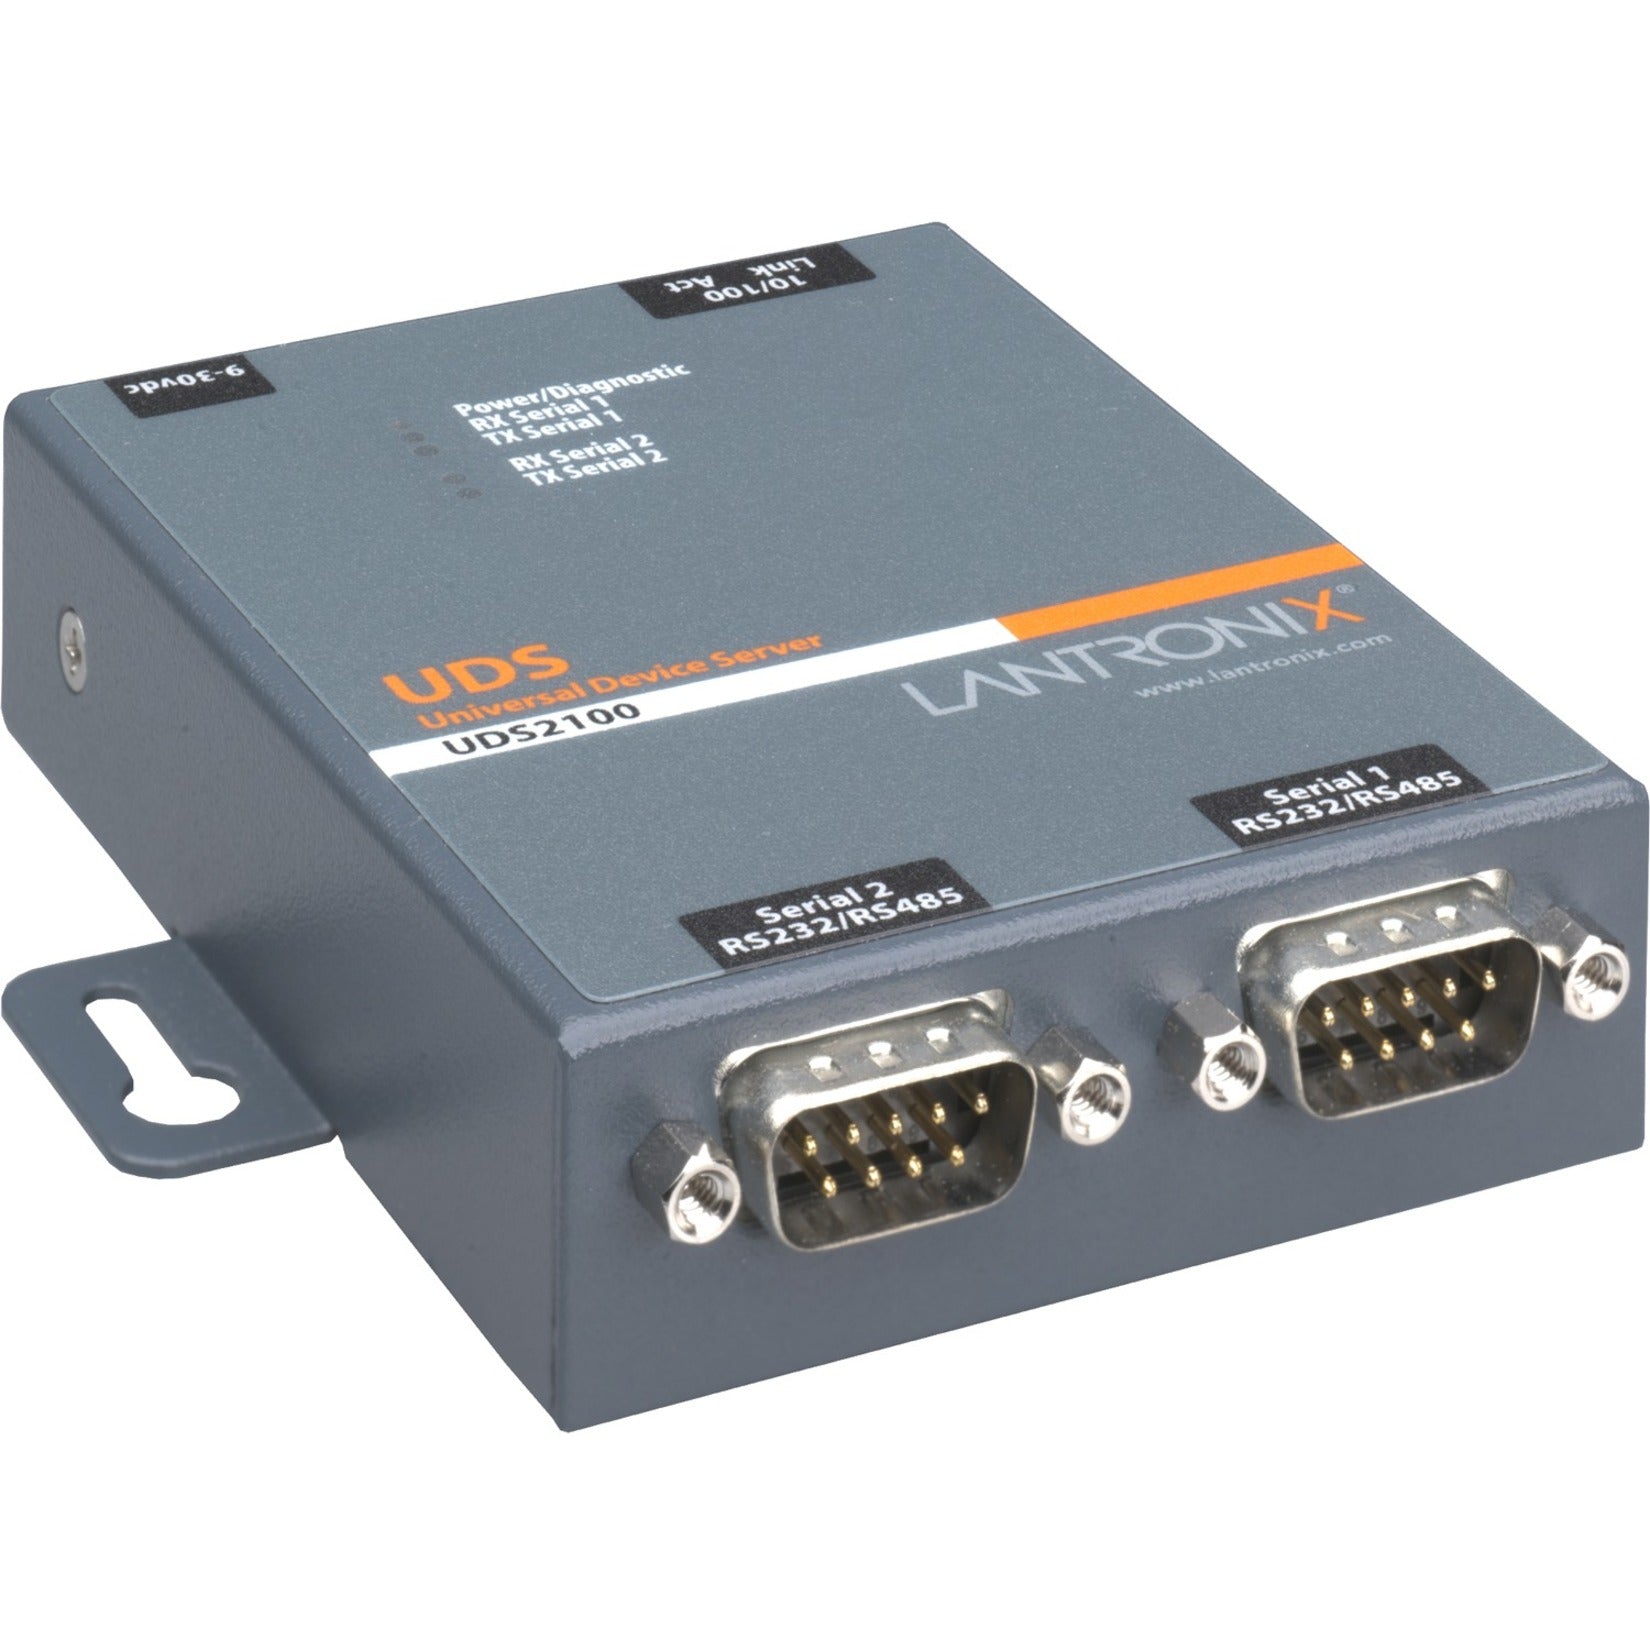 Lantronix UD2100001-01 UDS2100 2-Port Device Server, Supporting RS232, RS422 and RS485